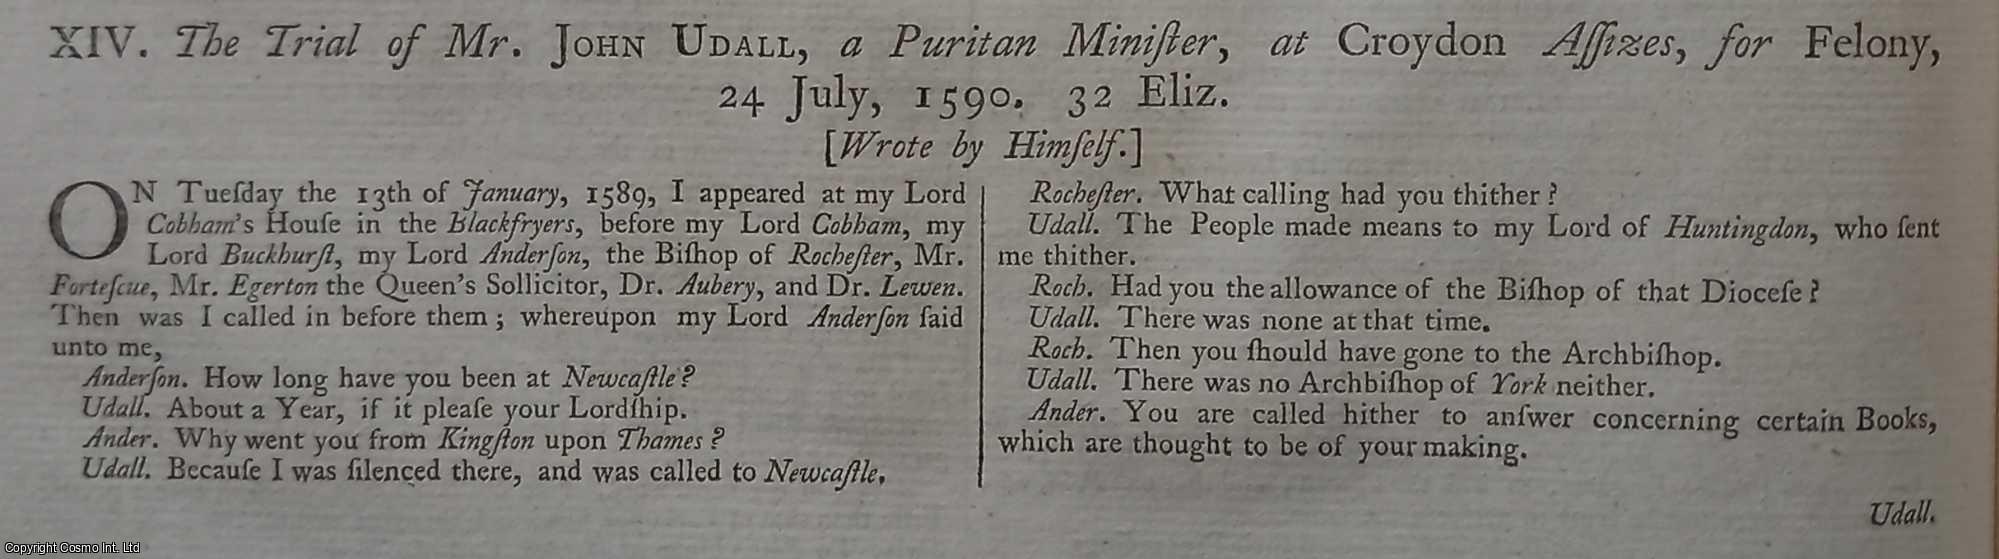 [Trial] - The Trial of Mr John Udall, a Puritan Minister, at Croydon Assizes, for Felony, 24 July 1590. An original article from the Collected State Trials.